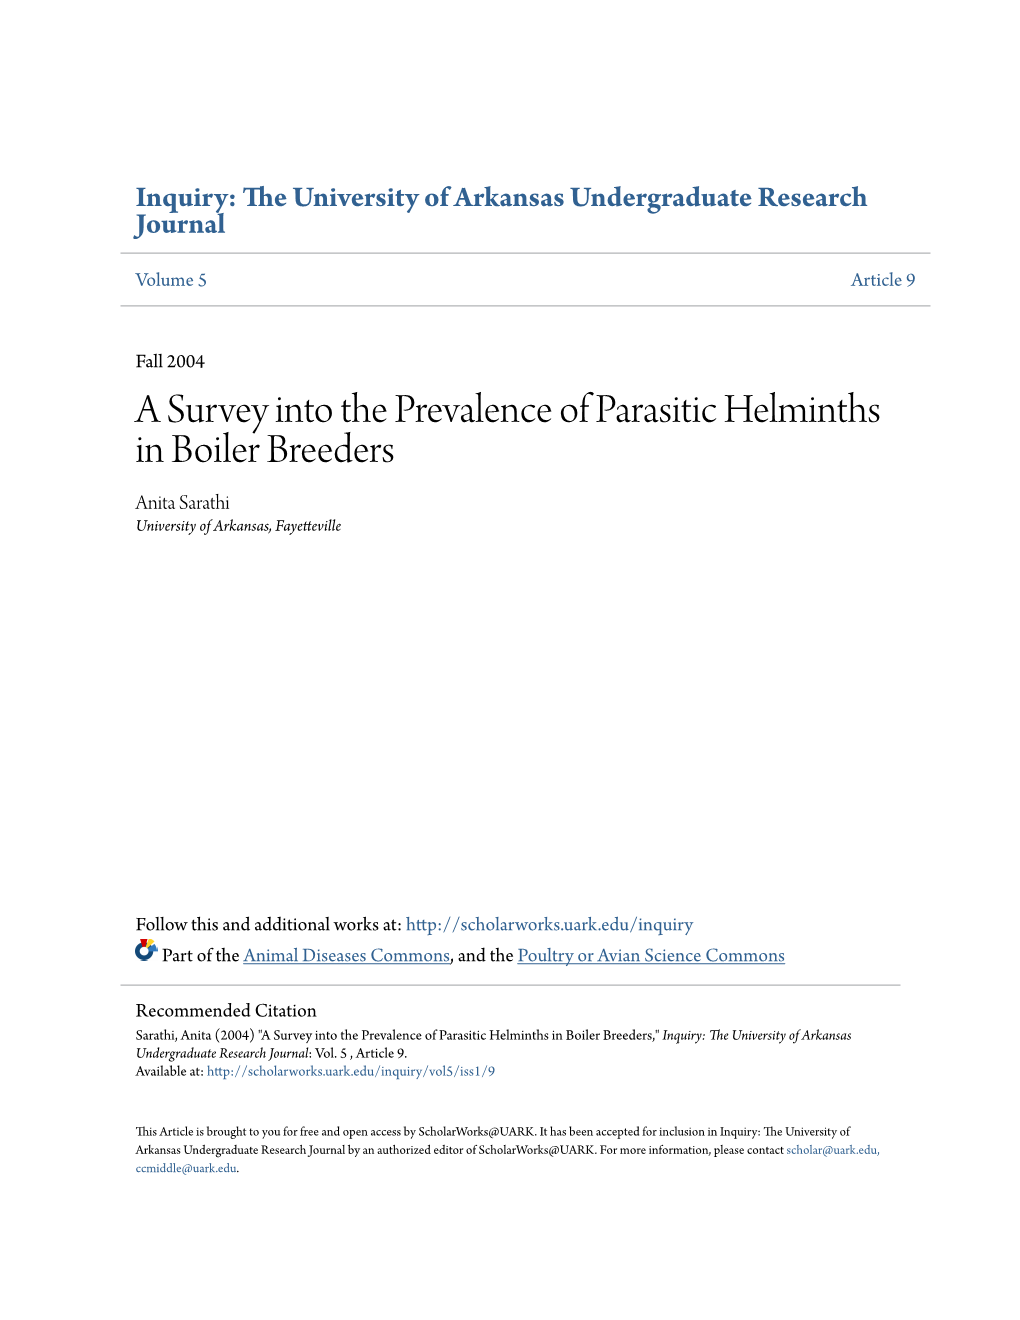 A Survey Into the Prevalence of Parasitic Helminths in Boiler Breeders Anita Sarathi University of Arkansas, Fayetteville